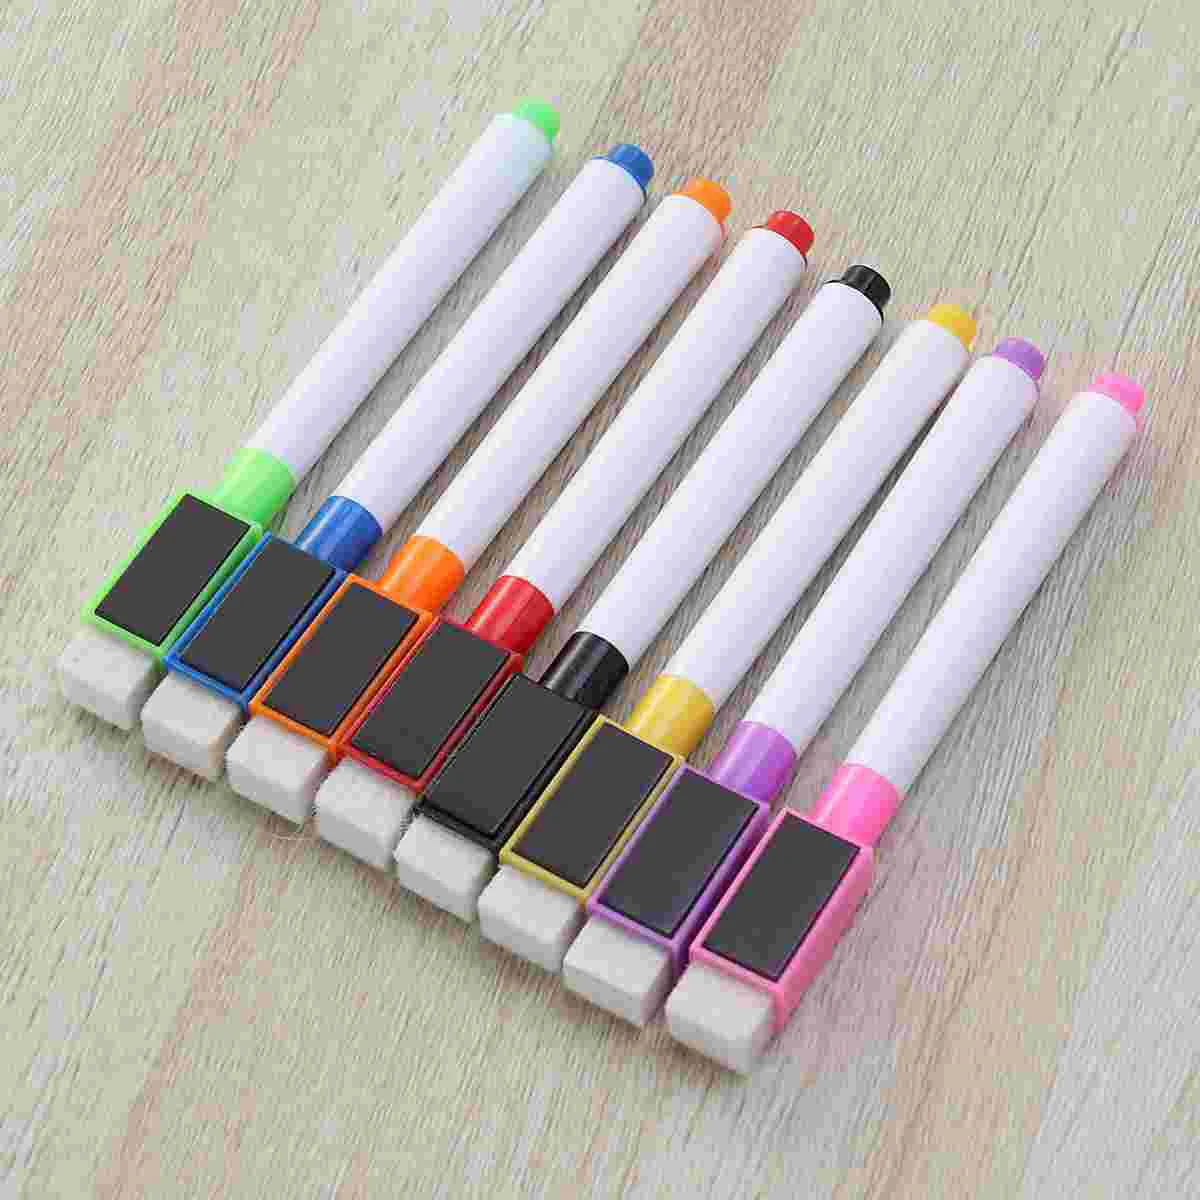 Dry Erase Markers With Eraser Whiteboard Dry Markers Erase Small Pen Magnet DrawingColored Pencils For Kids Marker Erasable